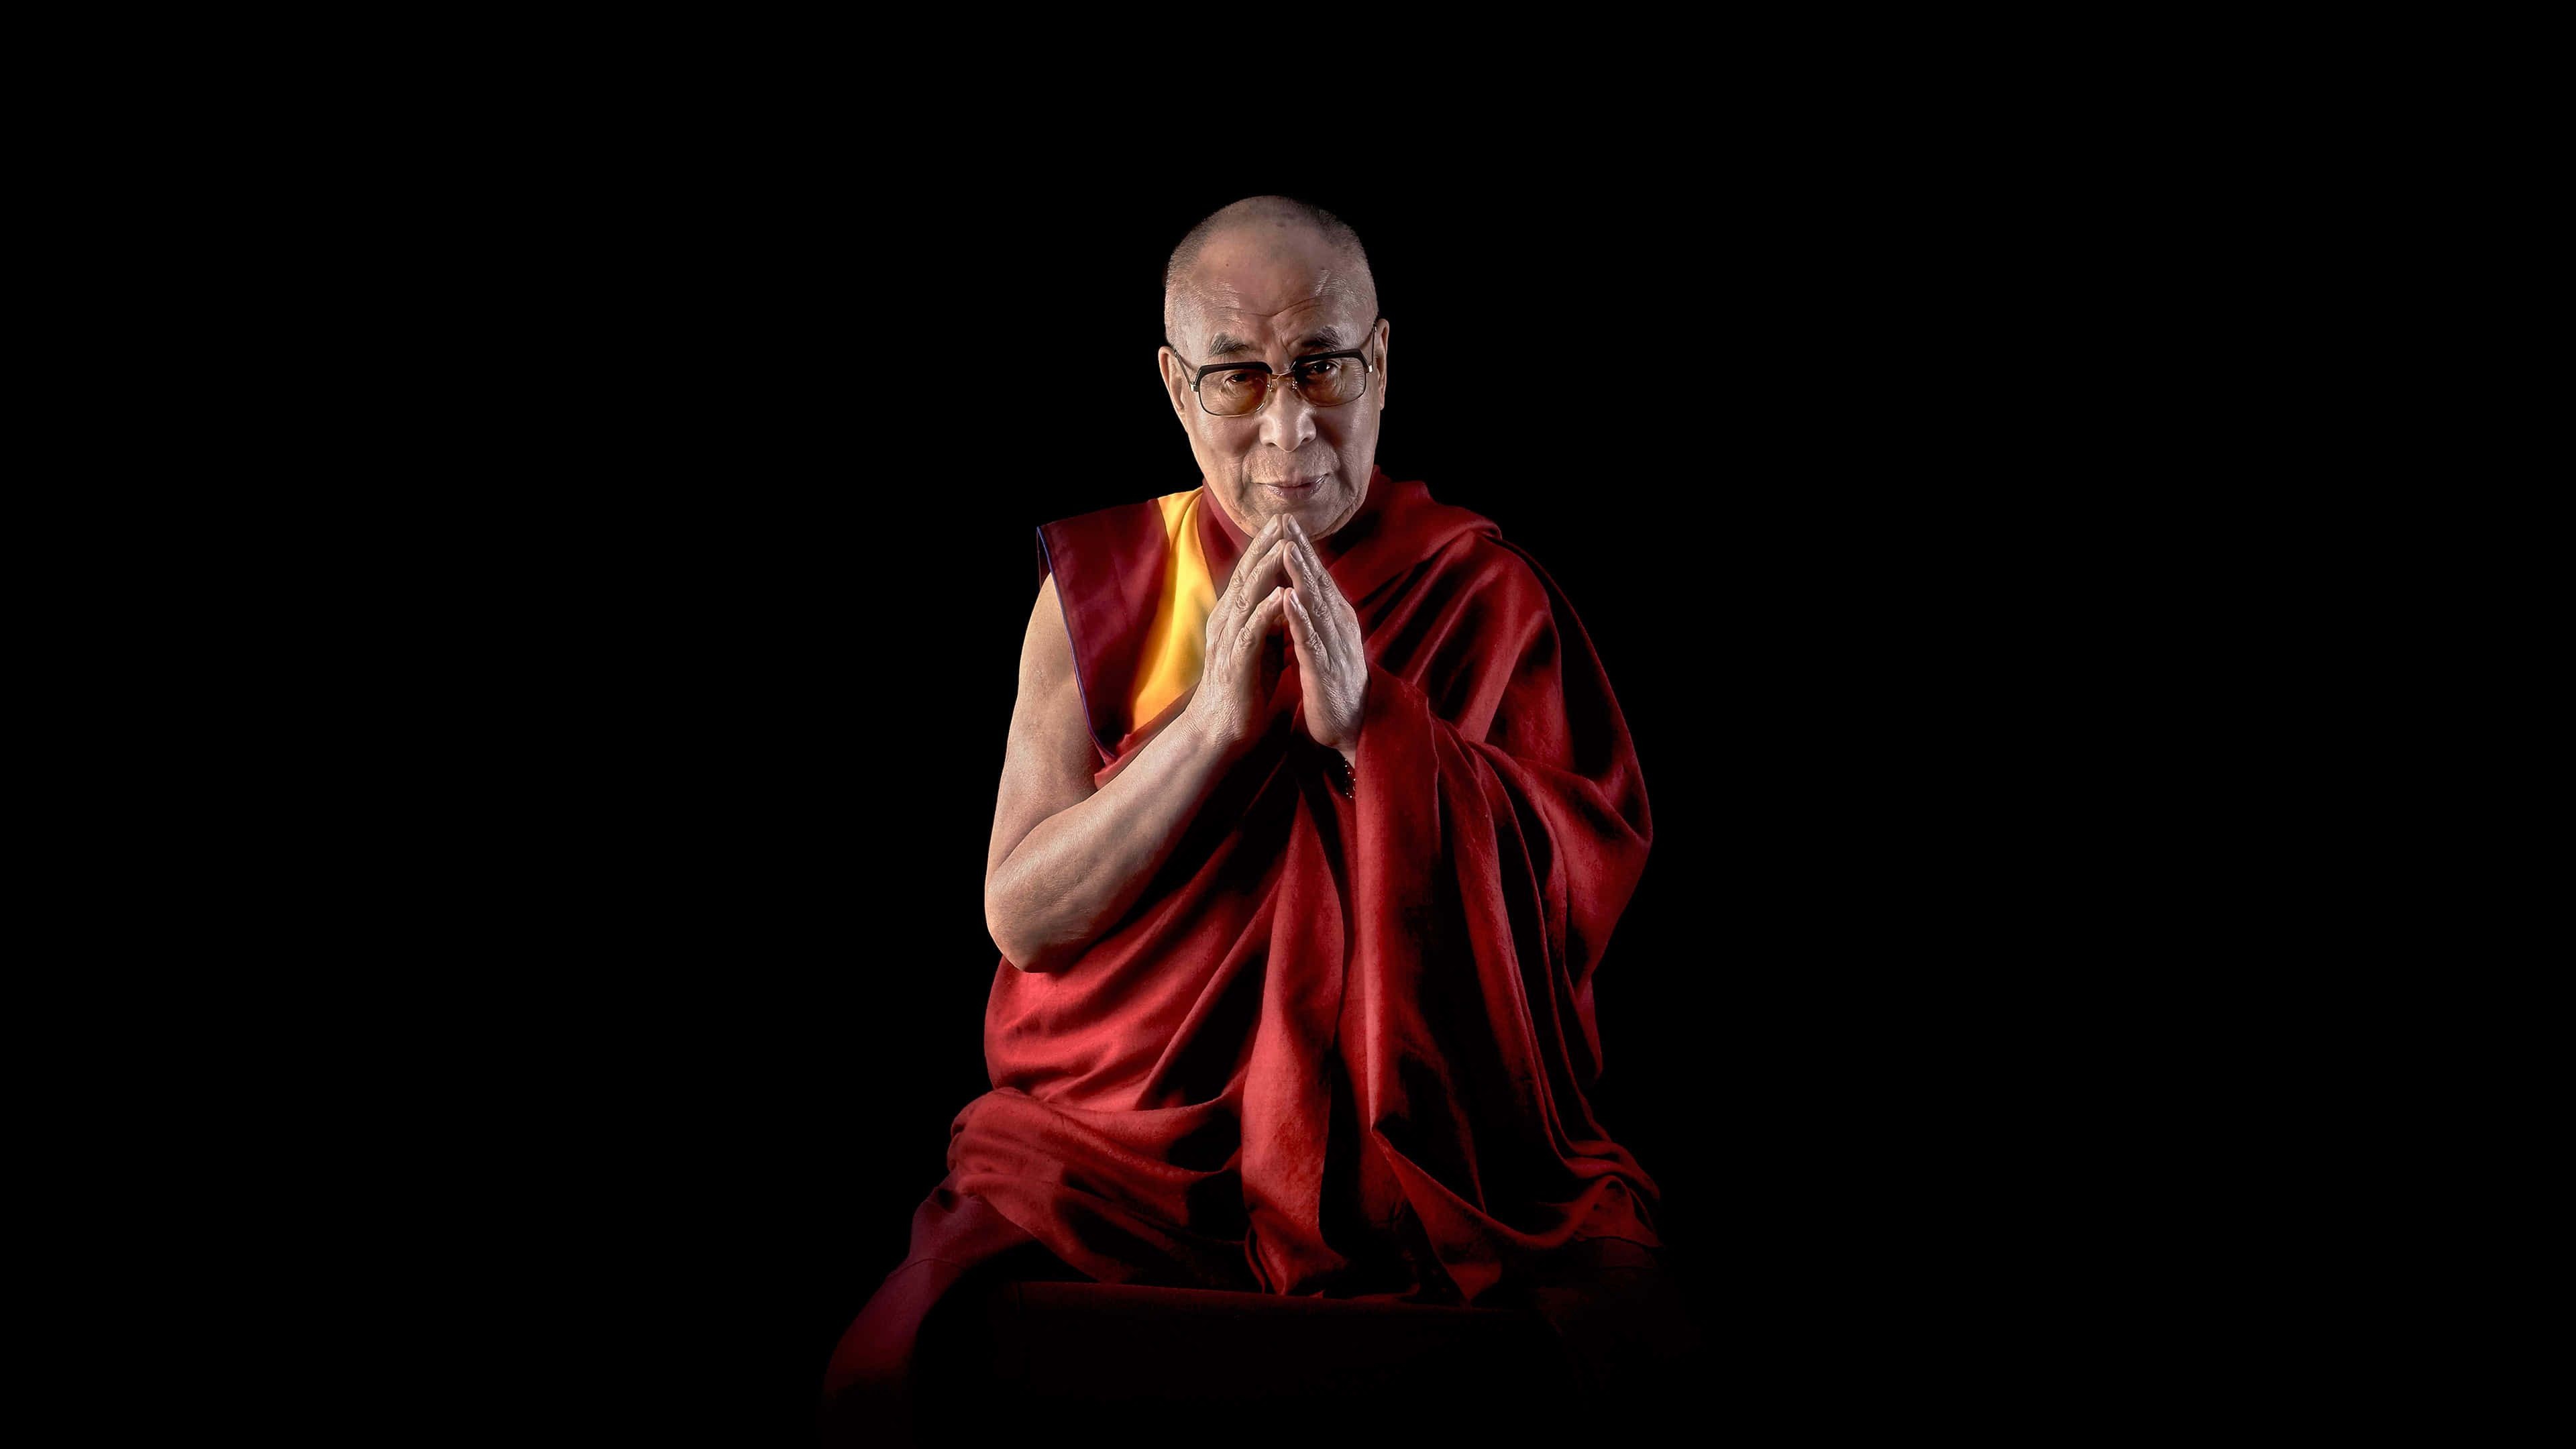 Dalai Lama: A title given by the Tibetan people to the foremost spiritual leader of the Gelug school. 3840x2160 4K Wallpaper.